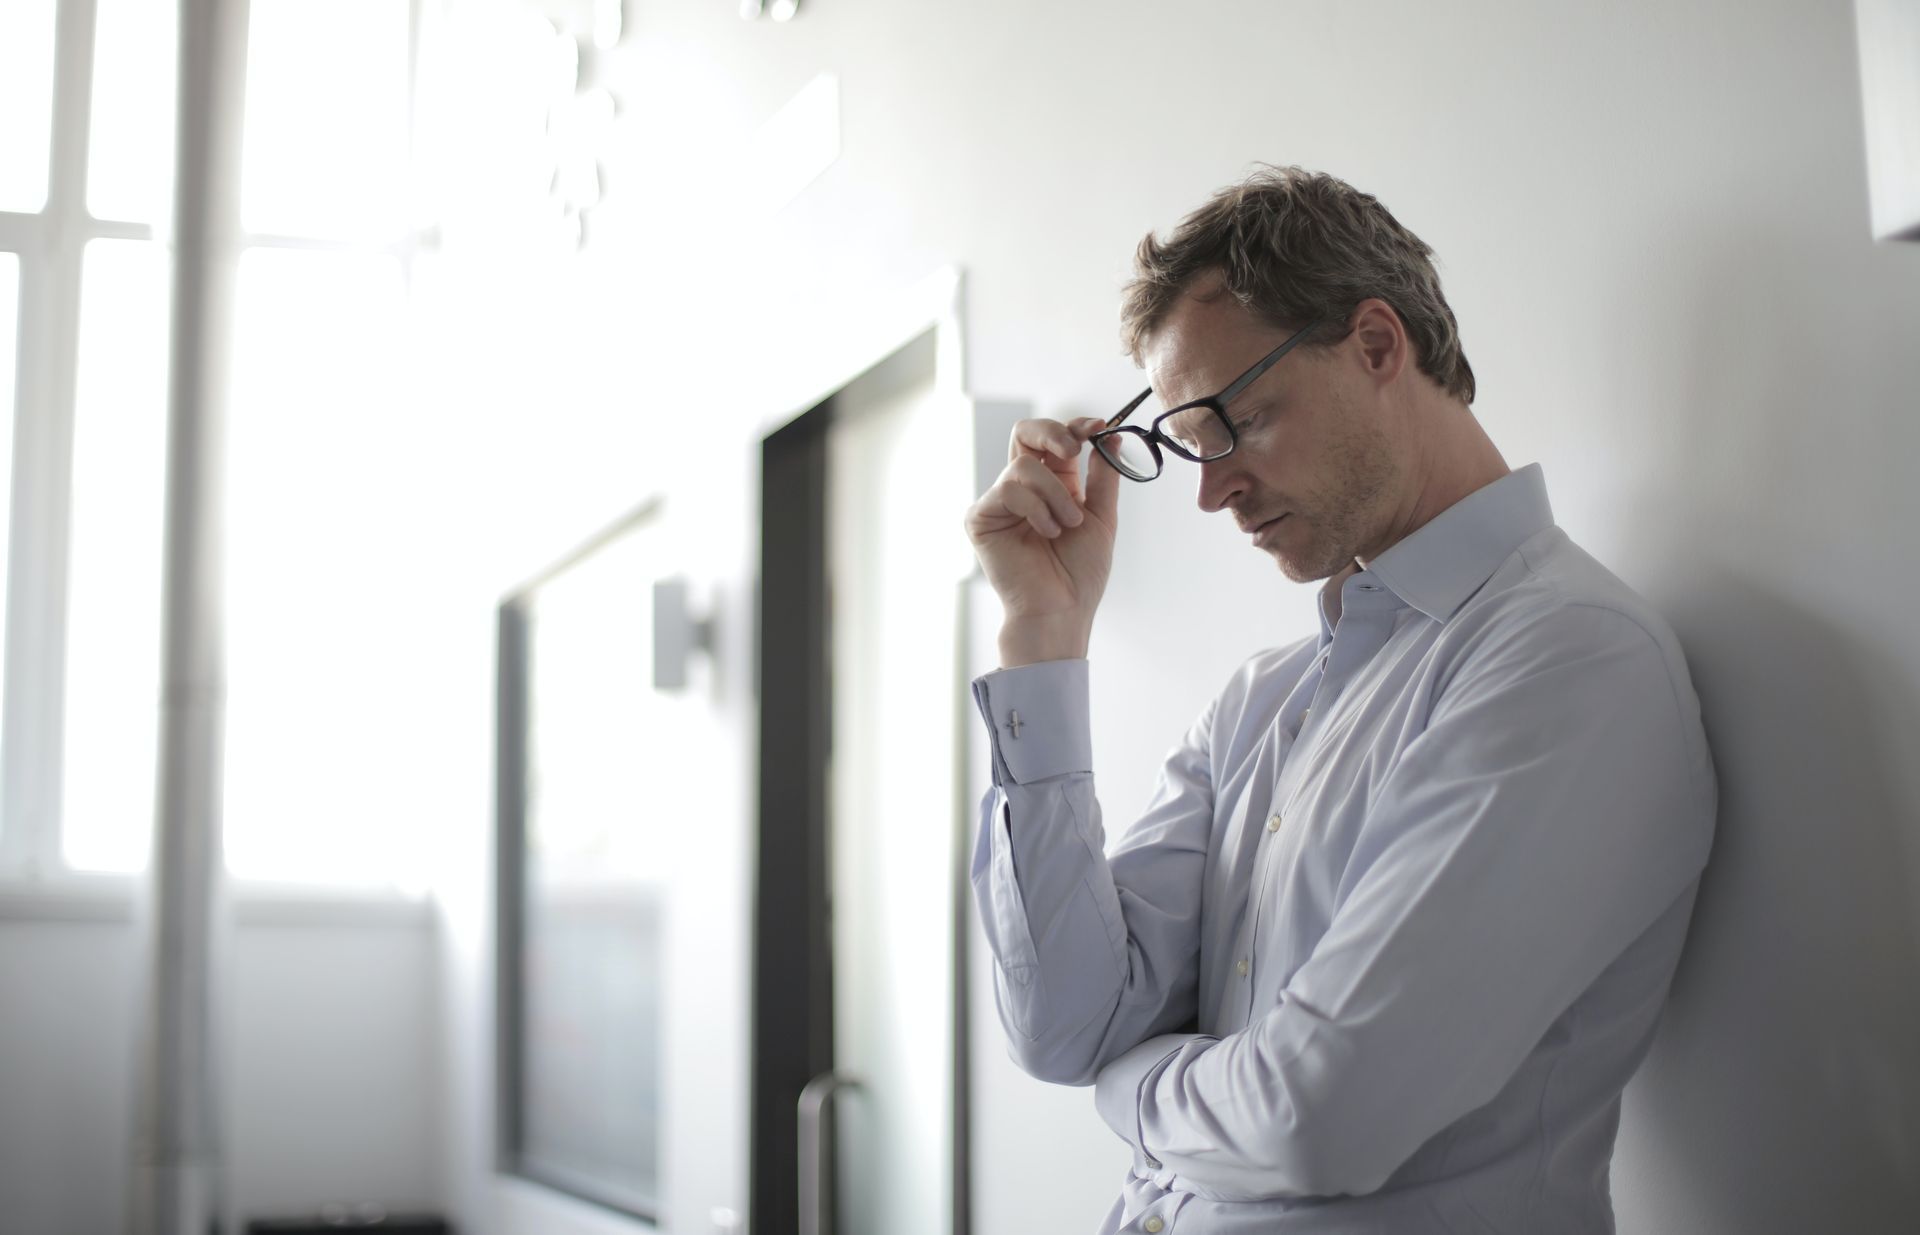 A man wearing glasses is leaning against a wall.